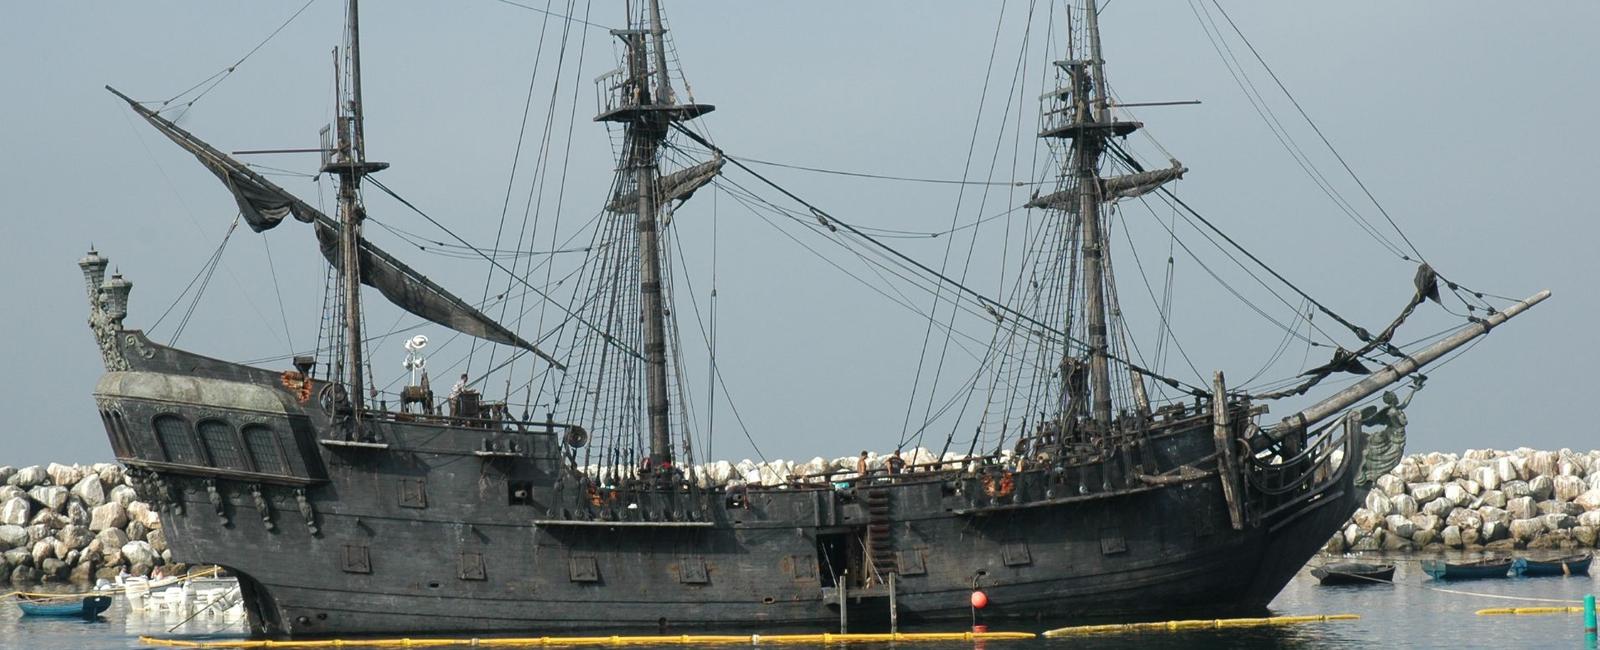 The black pearl was this type of criminal seafaring vessel pirateship